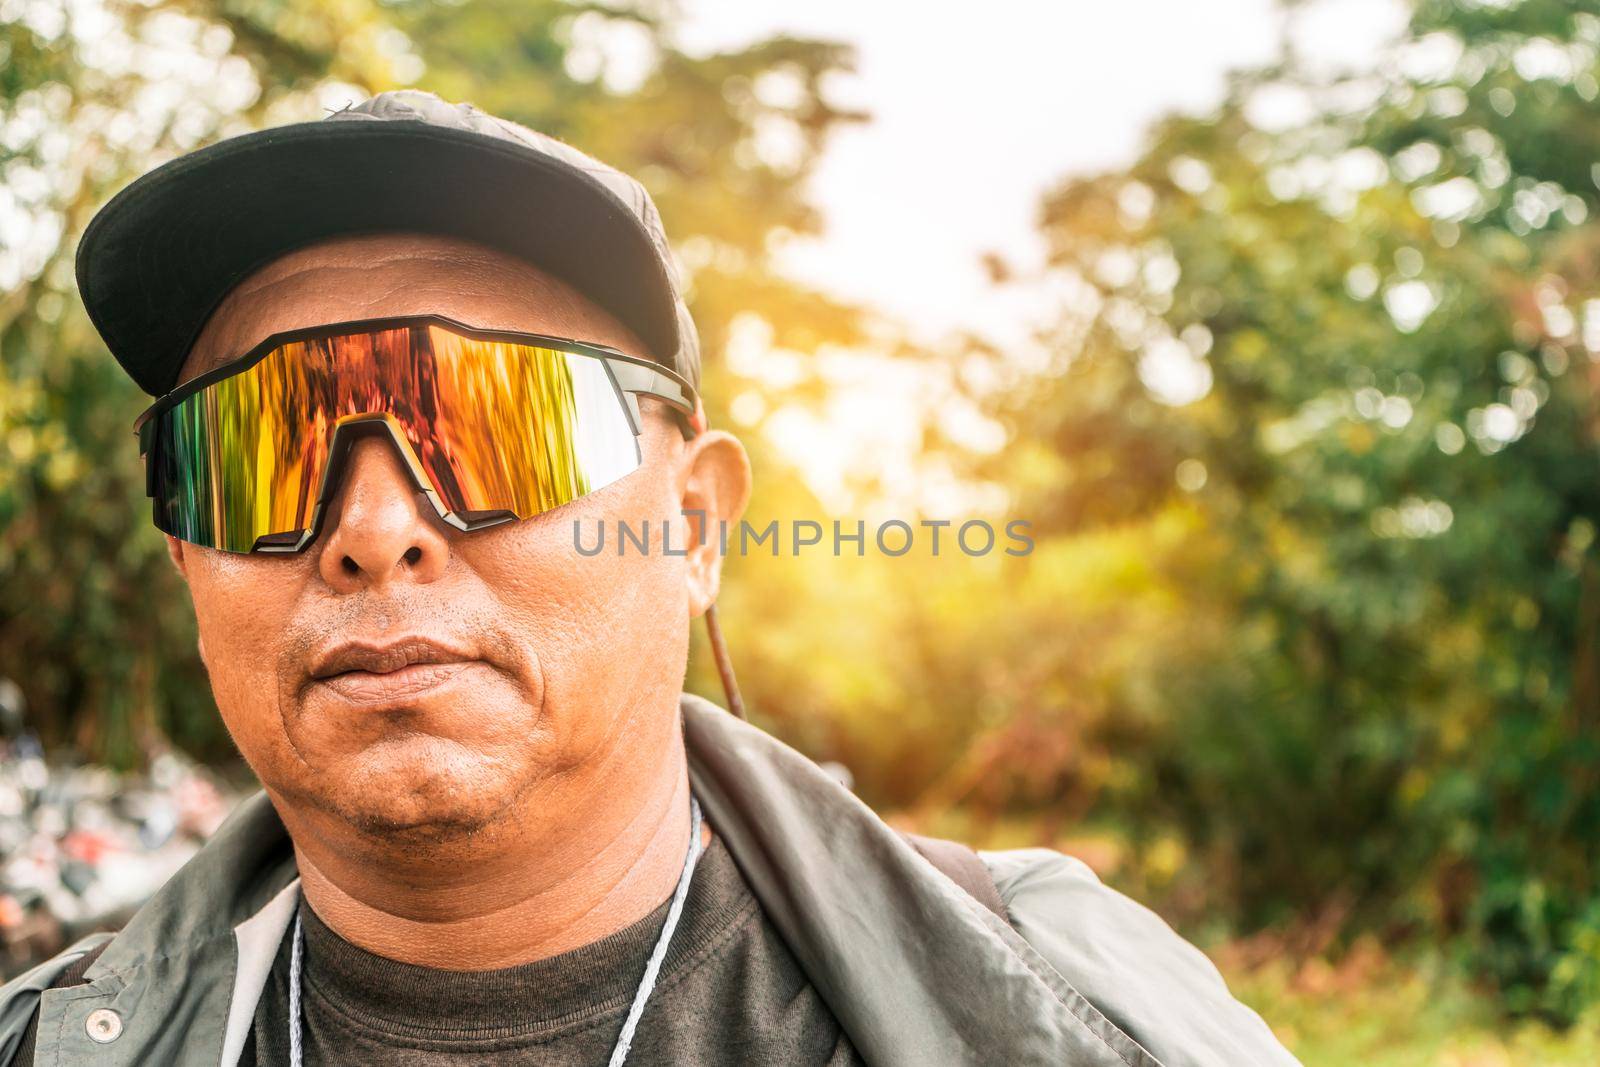 Portrait of an Indigenous man from the Miskito community in Nicaragua with glasses and motirized clothing